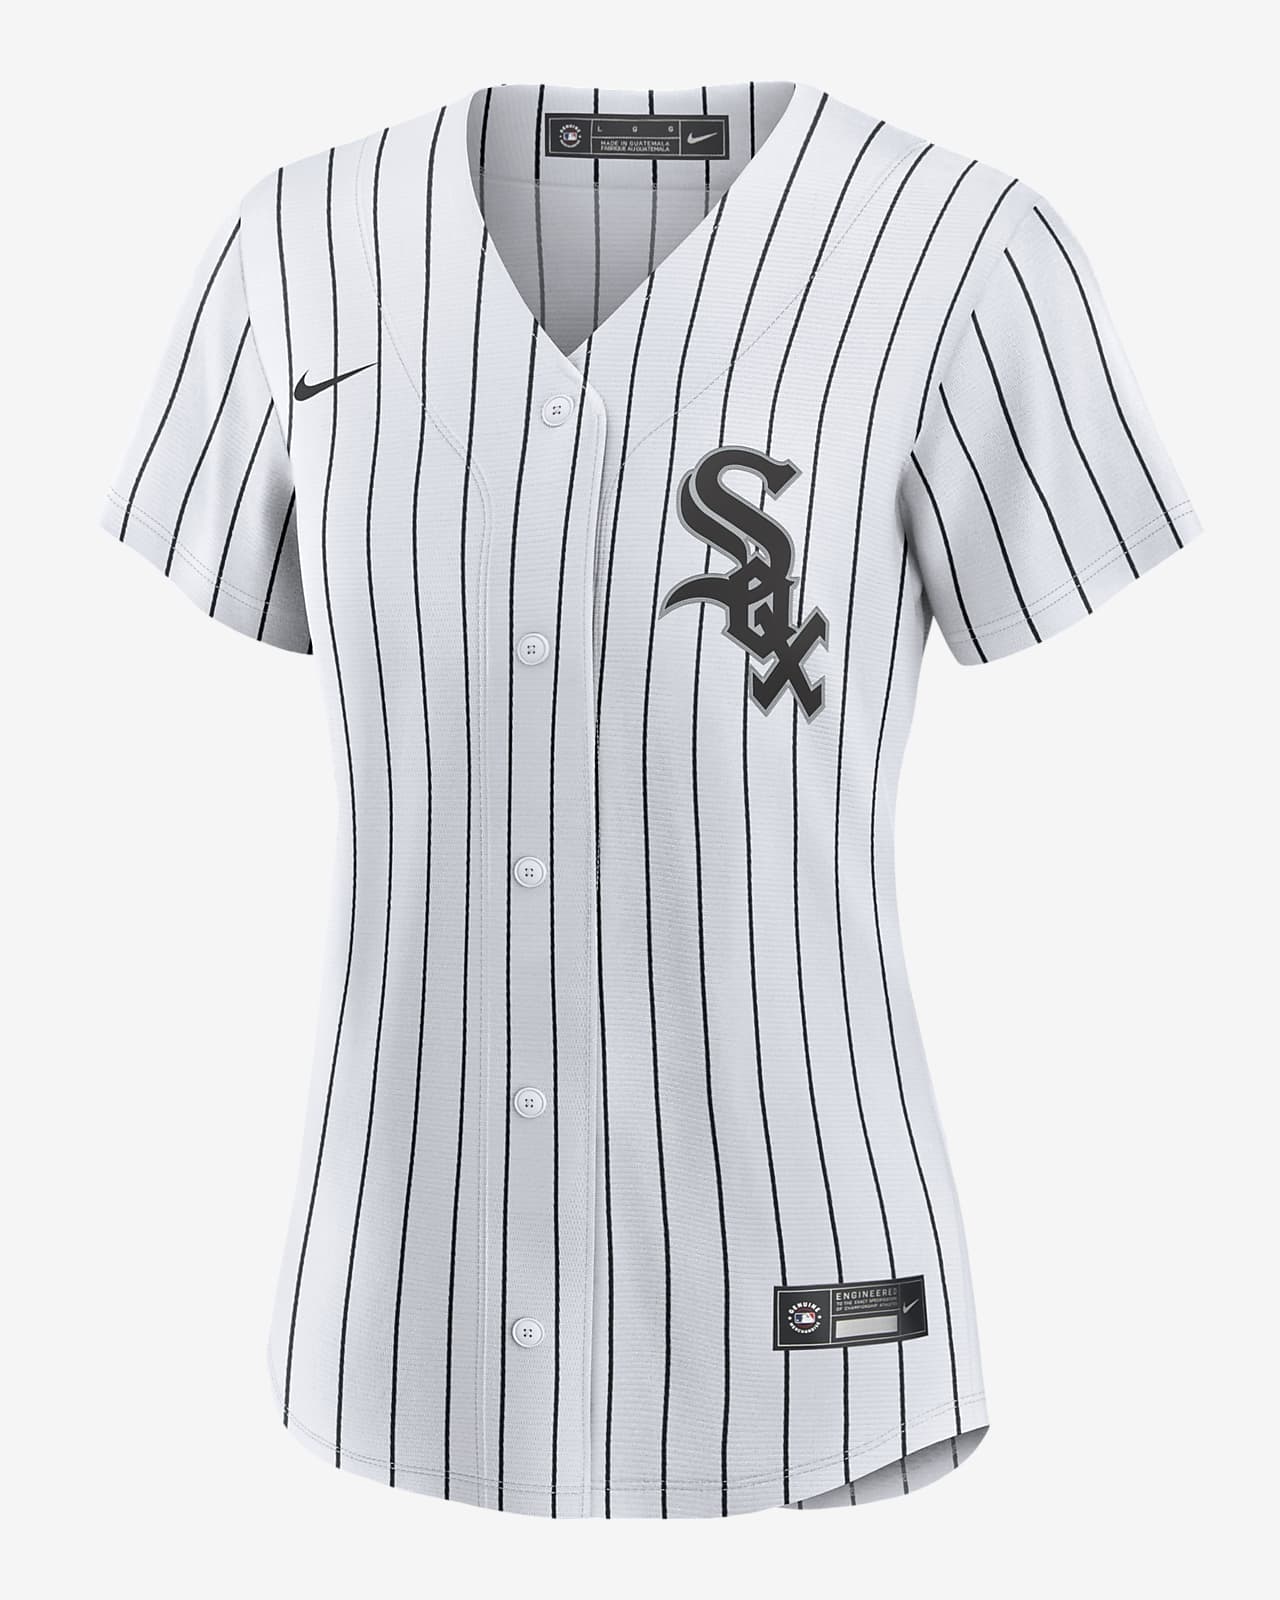 womens chicago white sox jersey